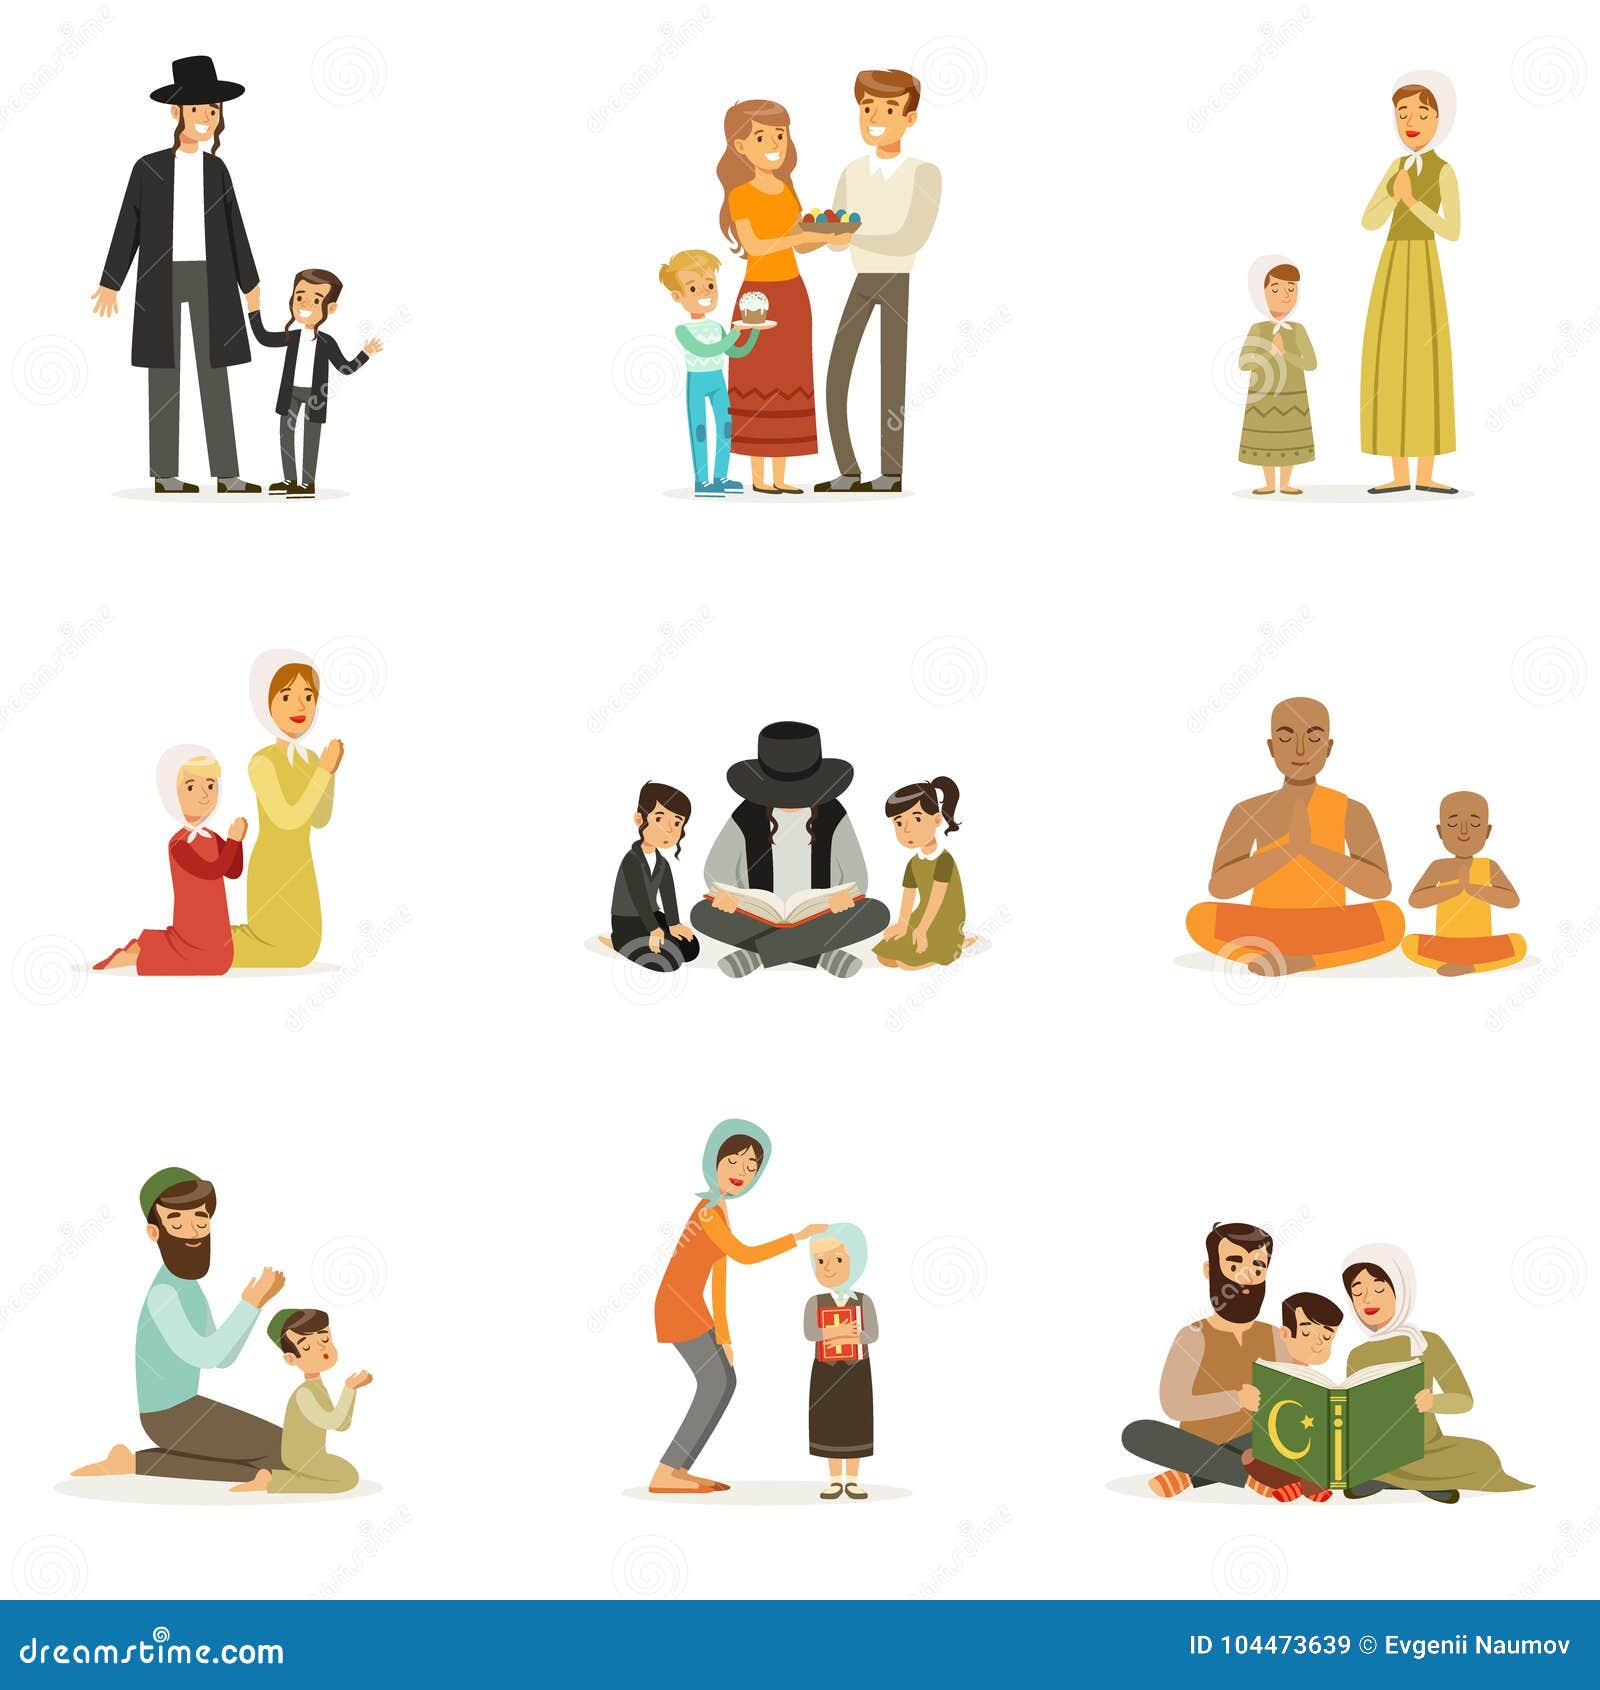  flat people characters of different religions set. jews, catholics, muslims, buddhists. families in national